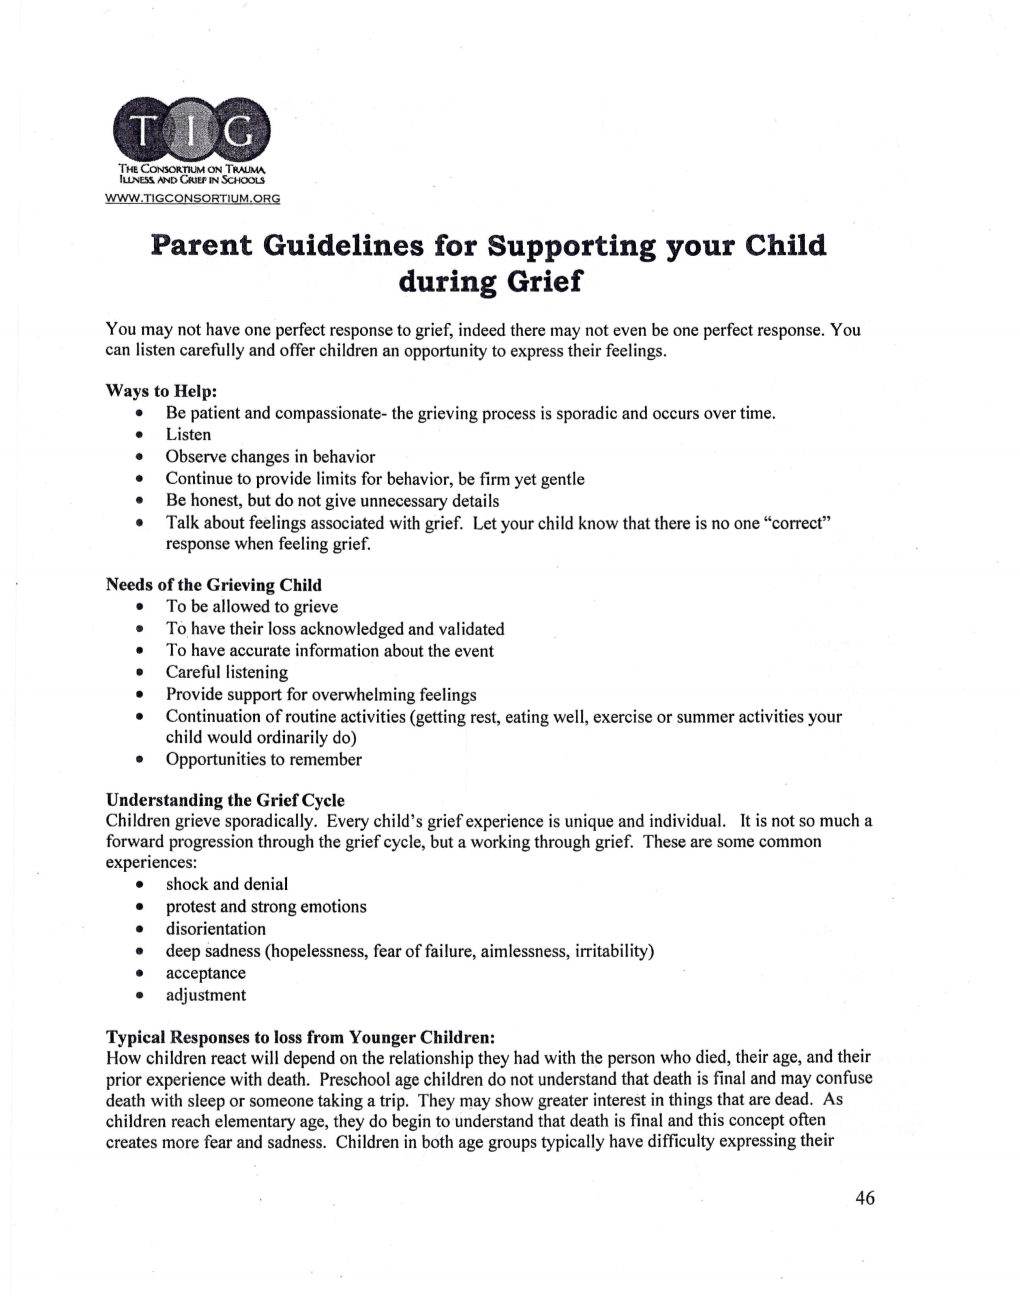 Parent Guidelines for Supporting Your Child During Grief